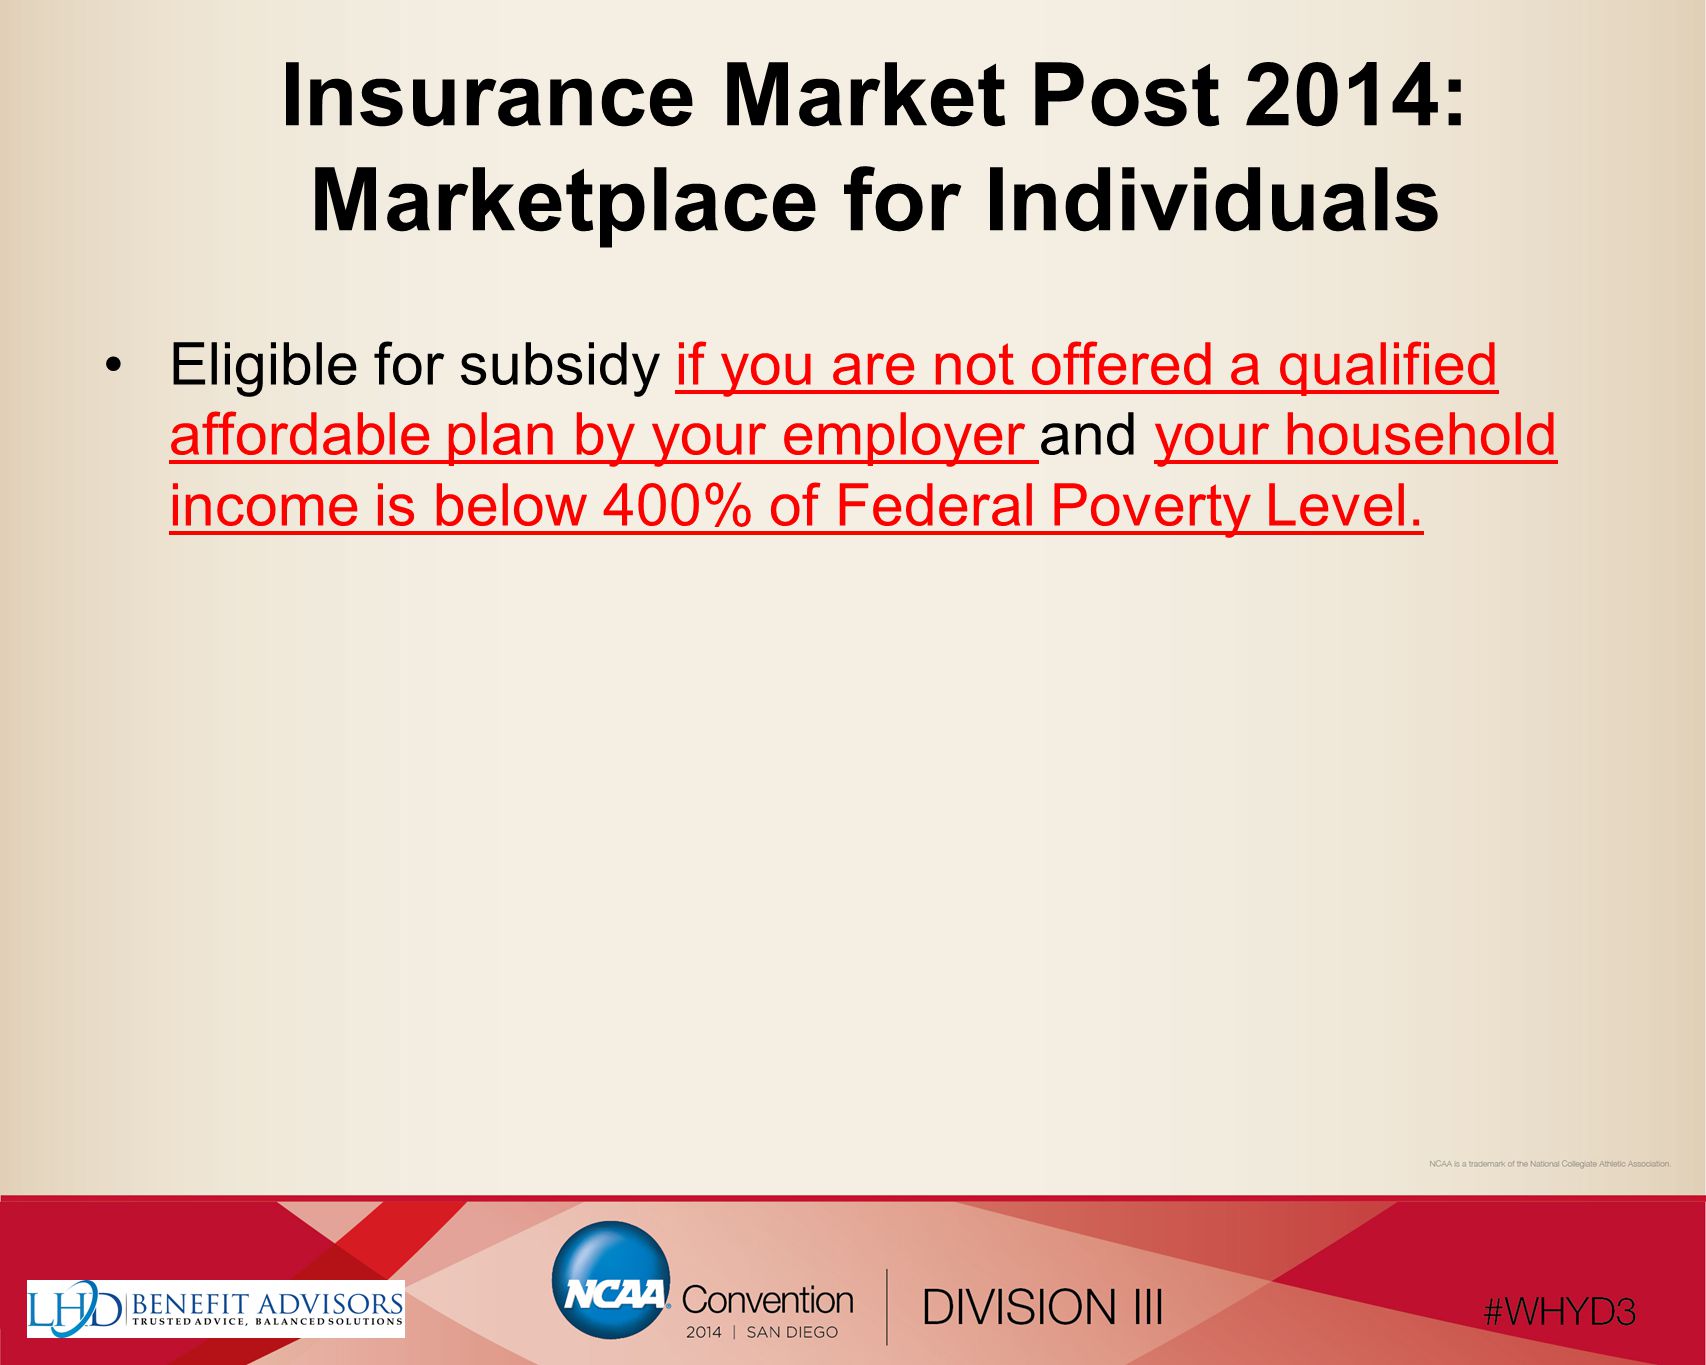 Insurance Market Post 2014: Marketplace for Individuals Eligible for subsidy if you are not offered a qualified affordable plan by your employer and your household income is below 400% of Federal Poverty Level.